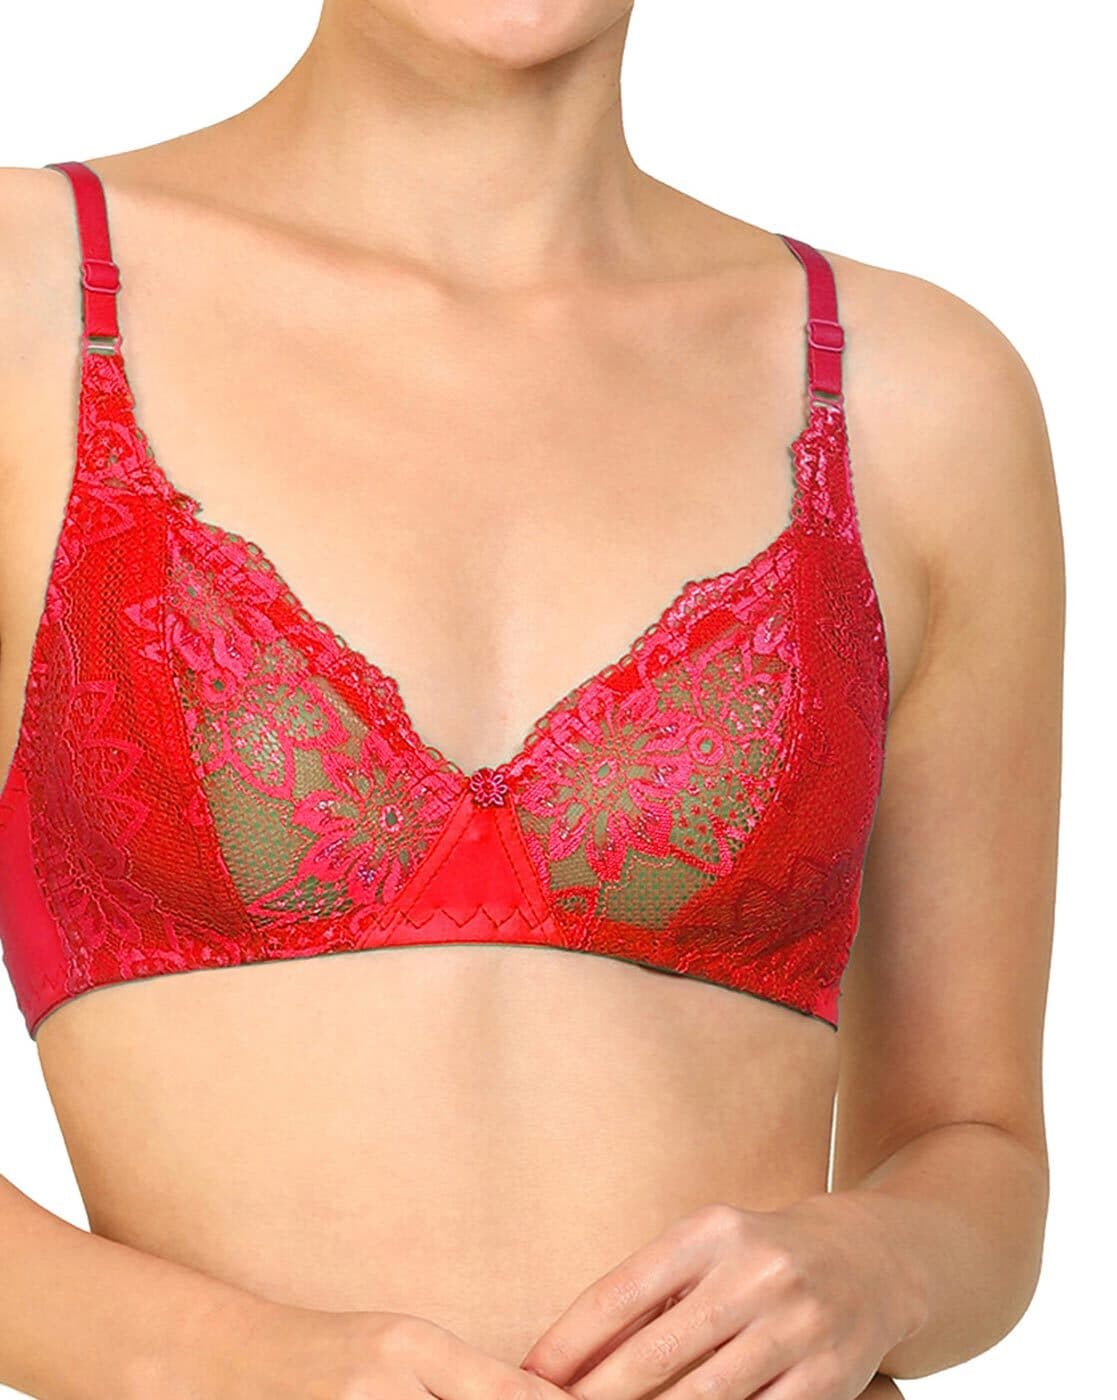 Buy Arousy AROUSY Pack Of 2 Self Design Cotton Lingerie Set Q_Net  Set_Red,Green_30 at Redfynd